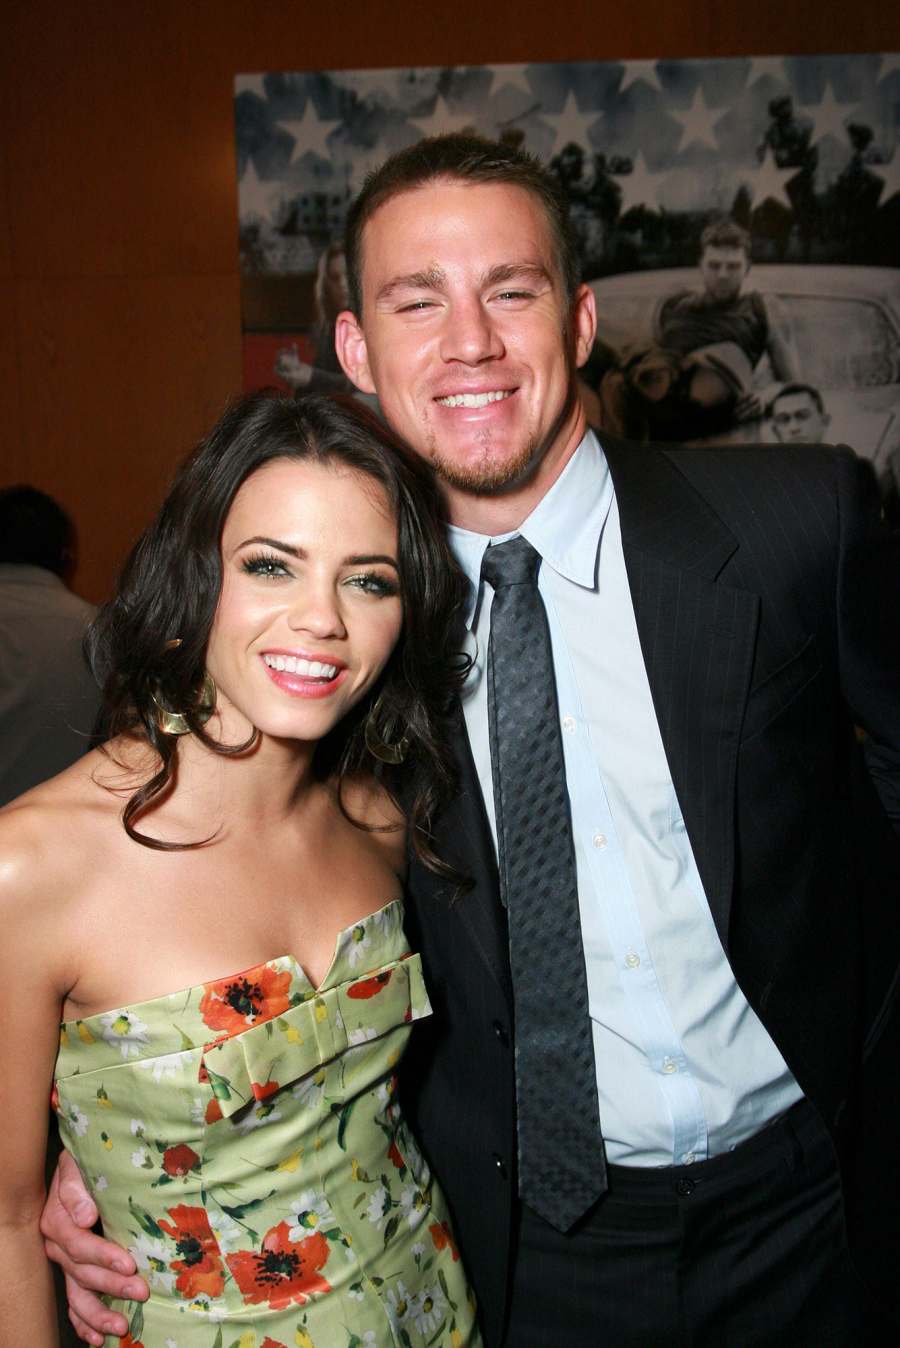 Get Married July 2009 Channing Tatum and Jenna Dewan Ups and Downs Through the Years